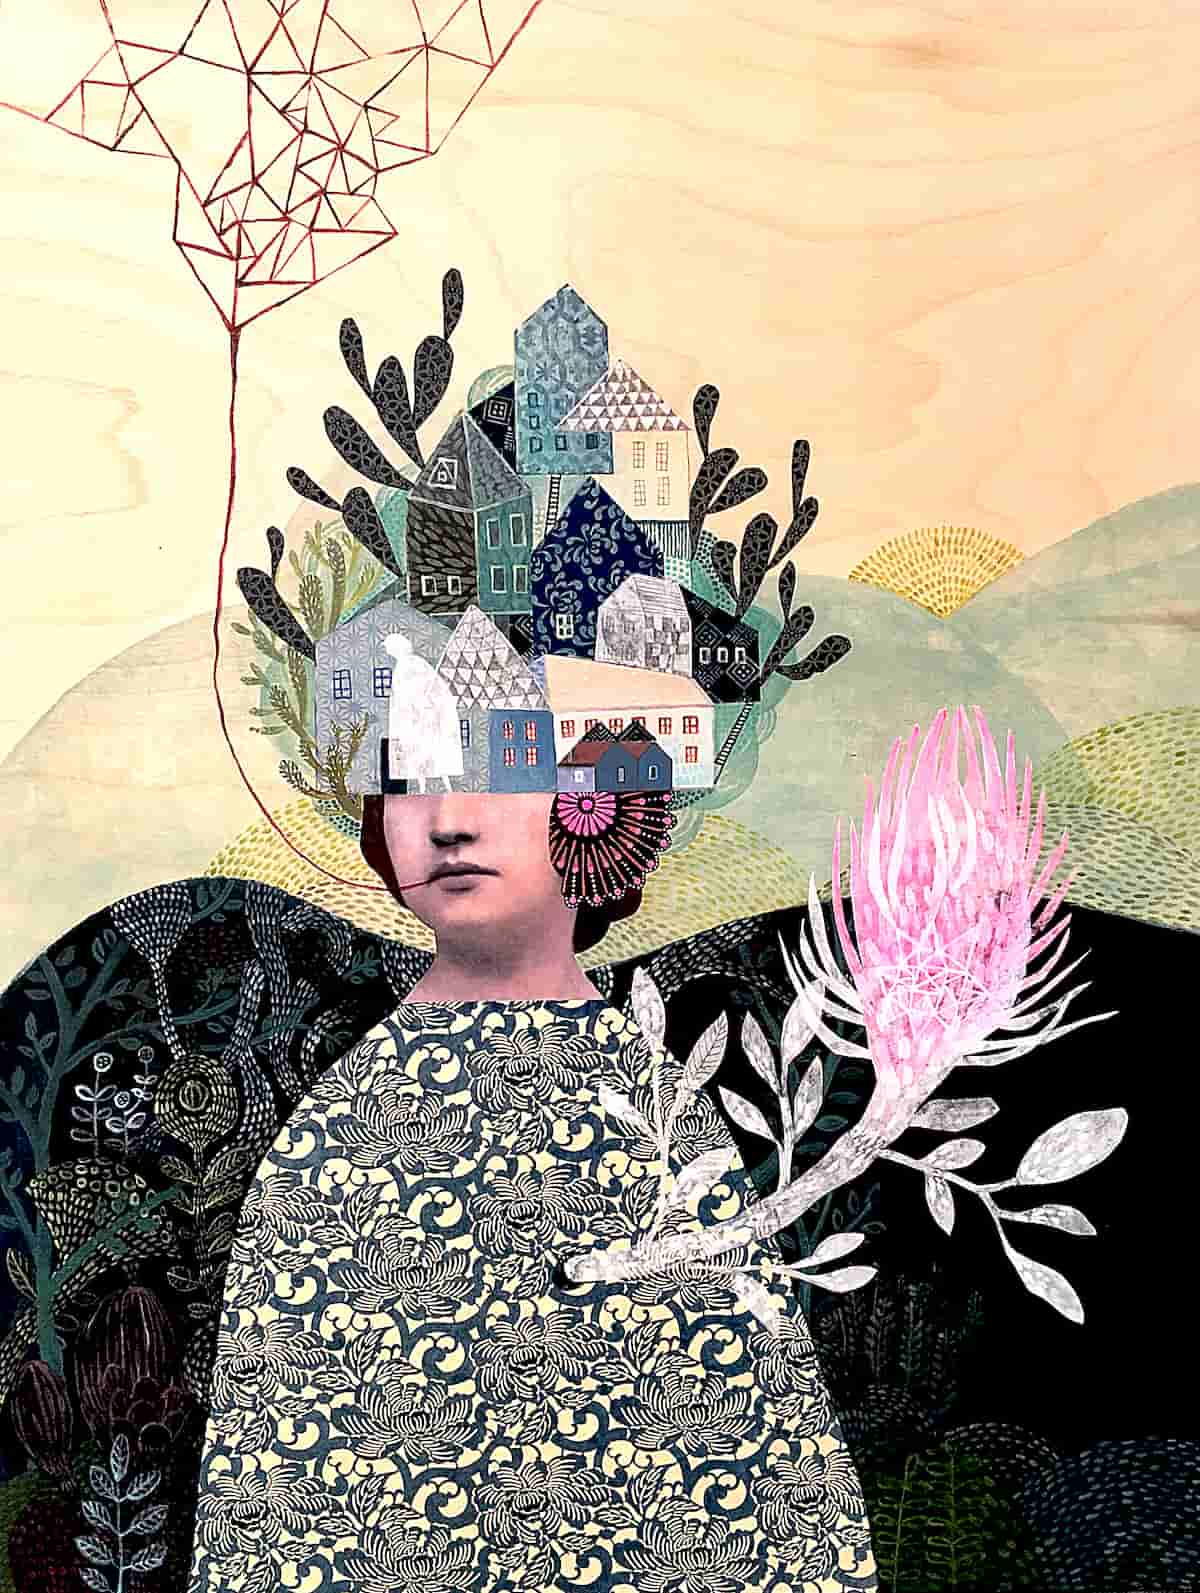 In Surreal Collages, Explores Home, Interiority, and the Terrain of Dreams